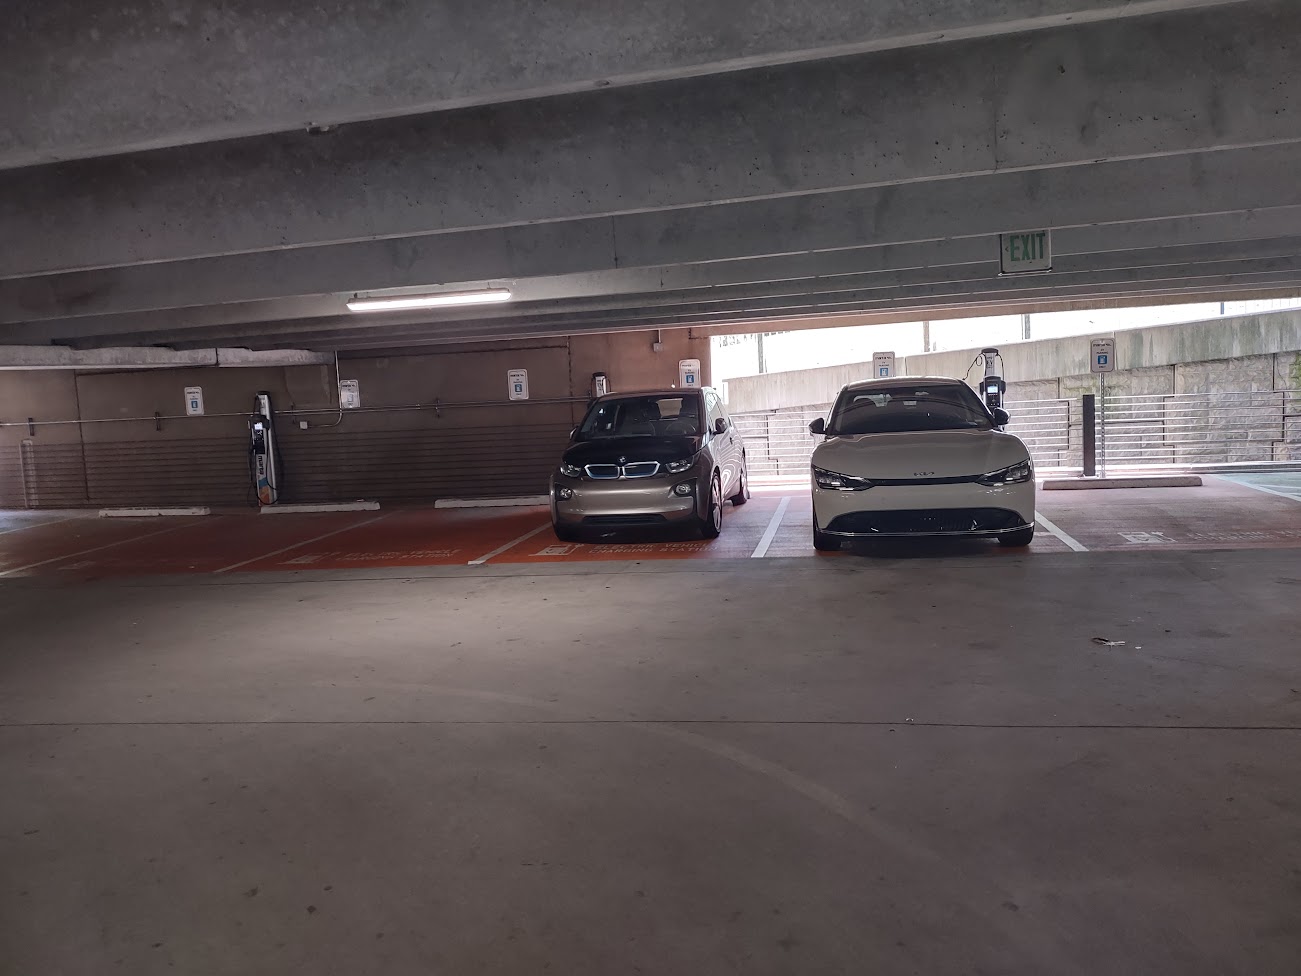 EV parking spots at the MARTA garage showing six spot with two vehicles.